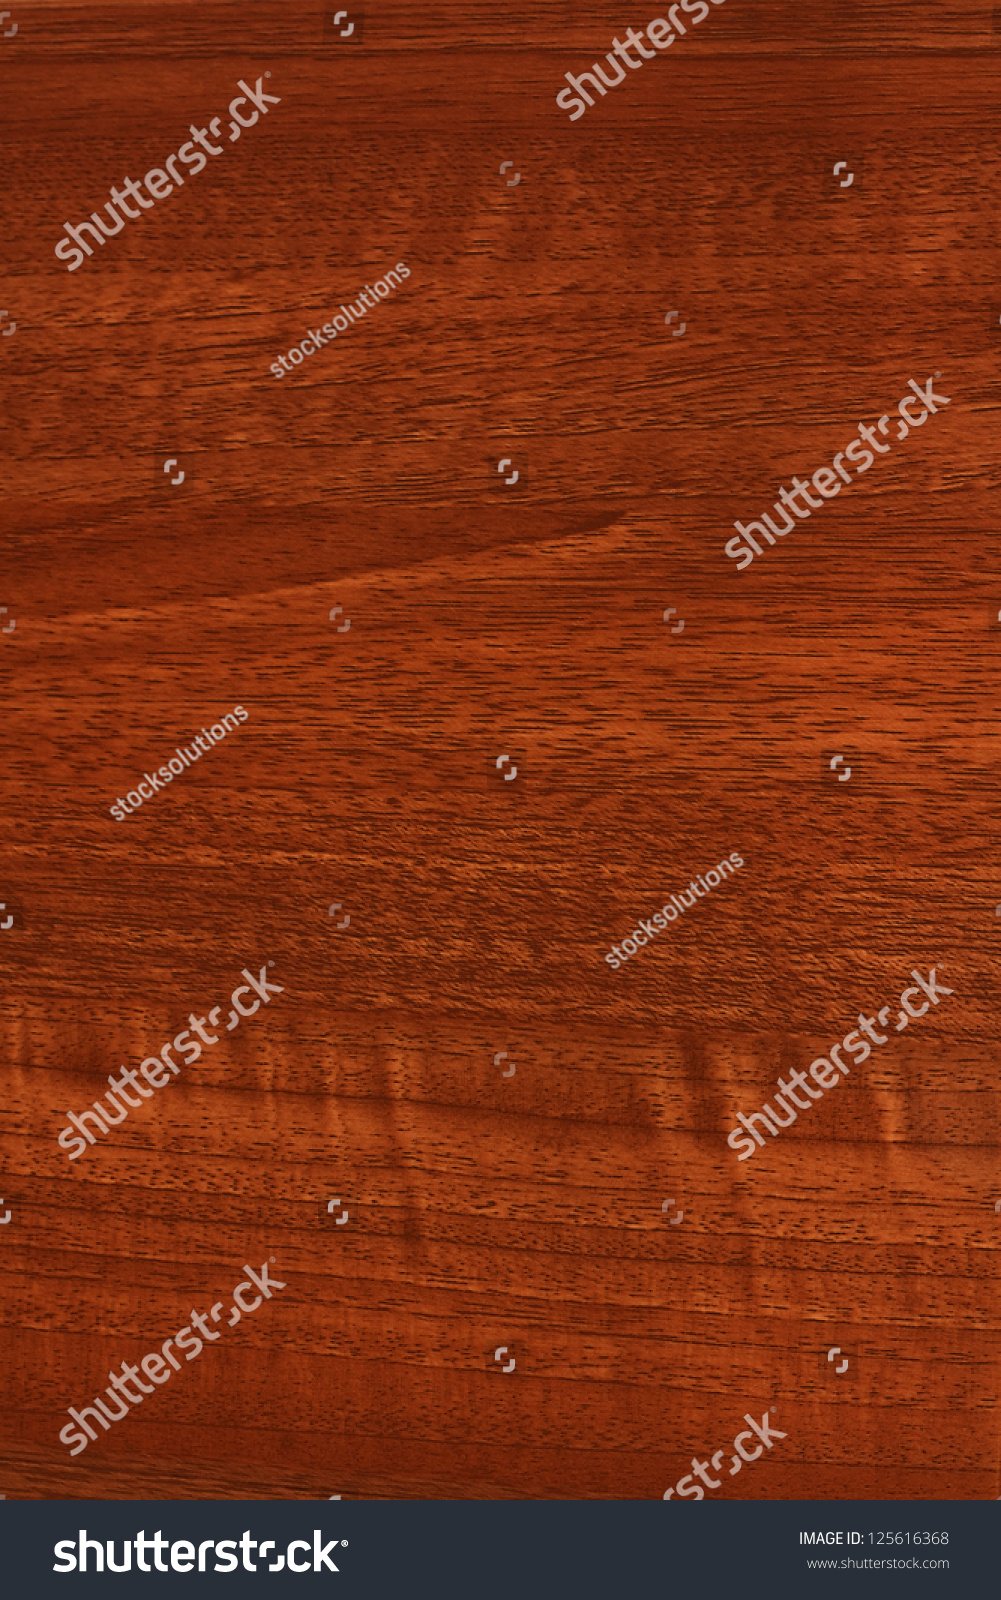 A Close Up Of Mahogany, Teak Or Stained Wood Grain For 